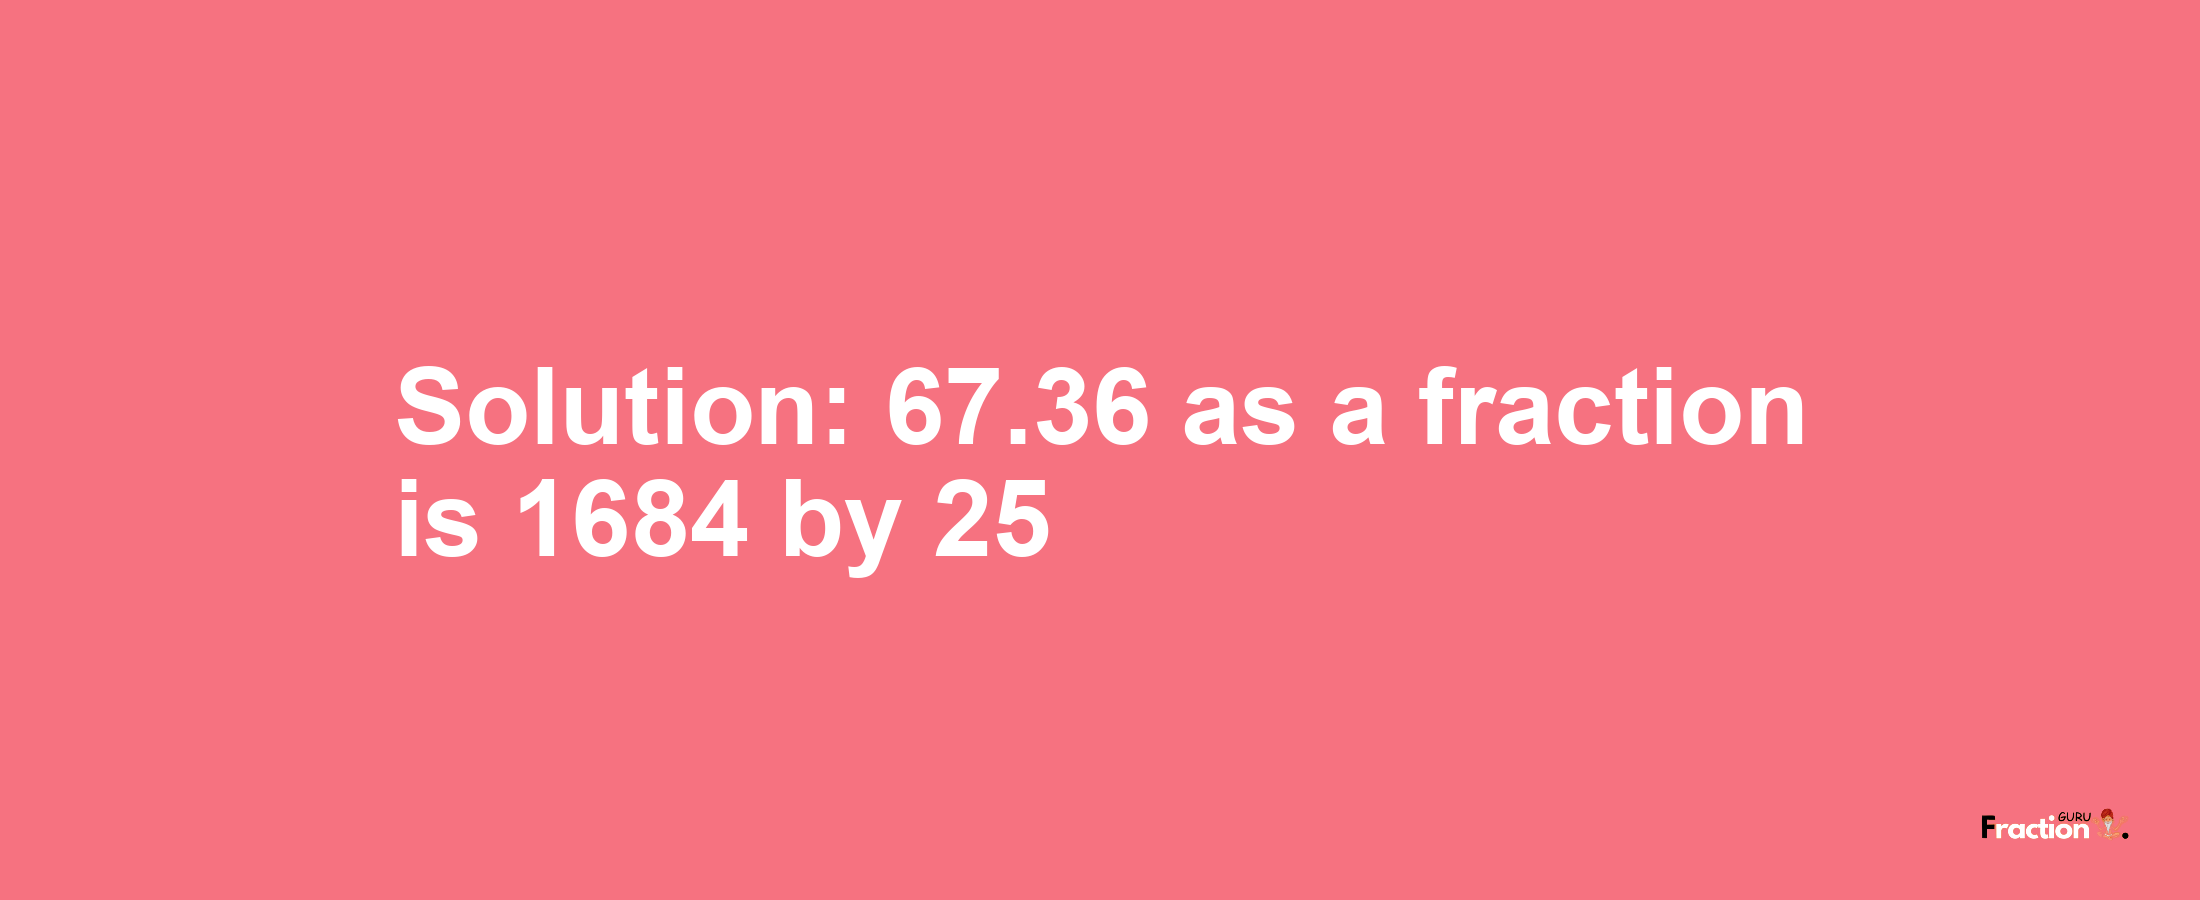 Solution:67.36 as a fraction is 1684/25